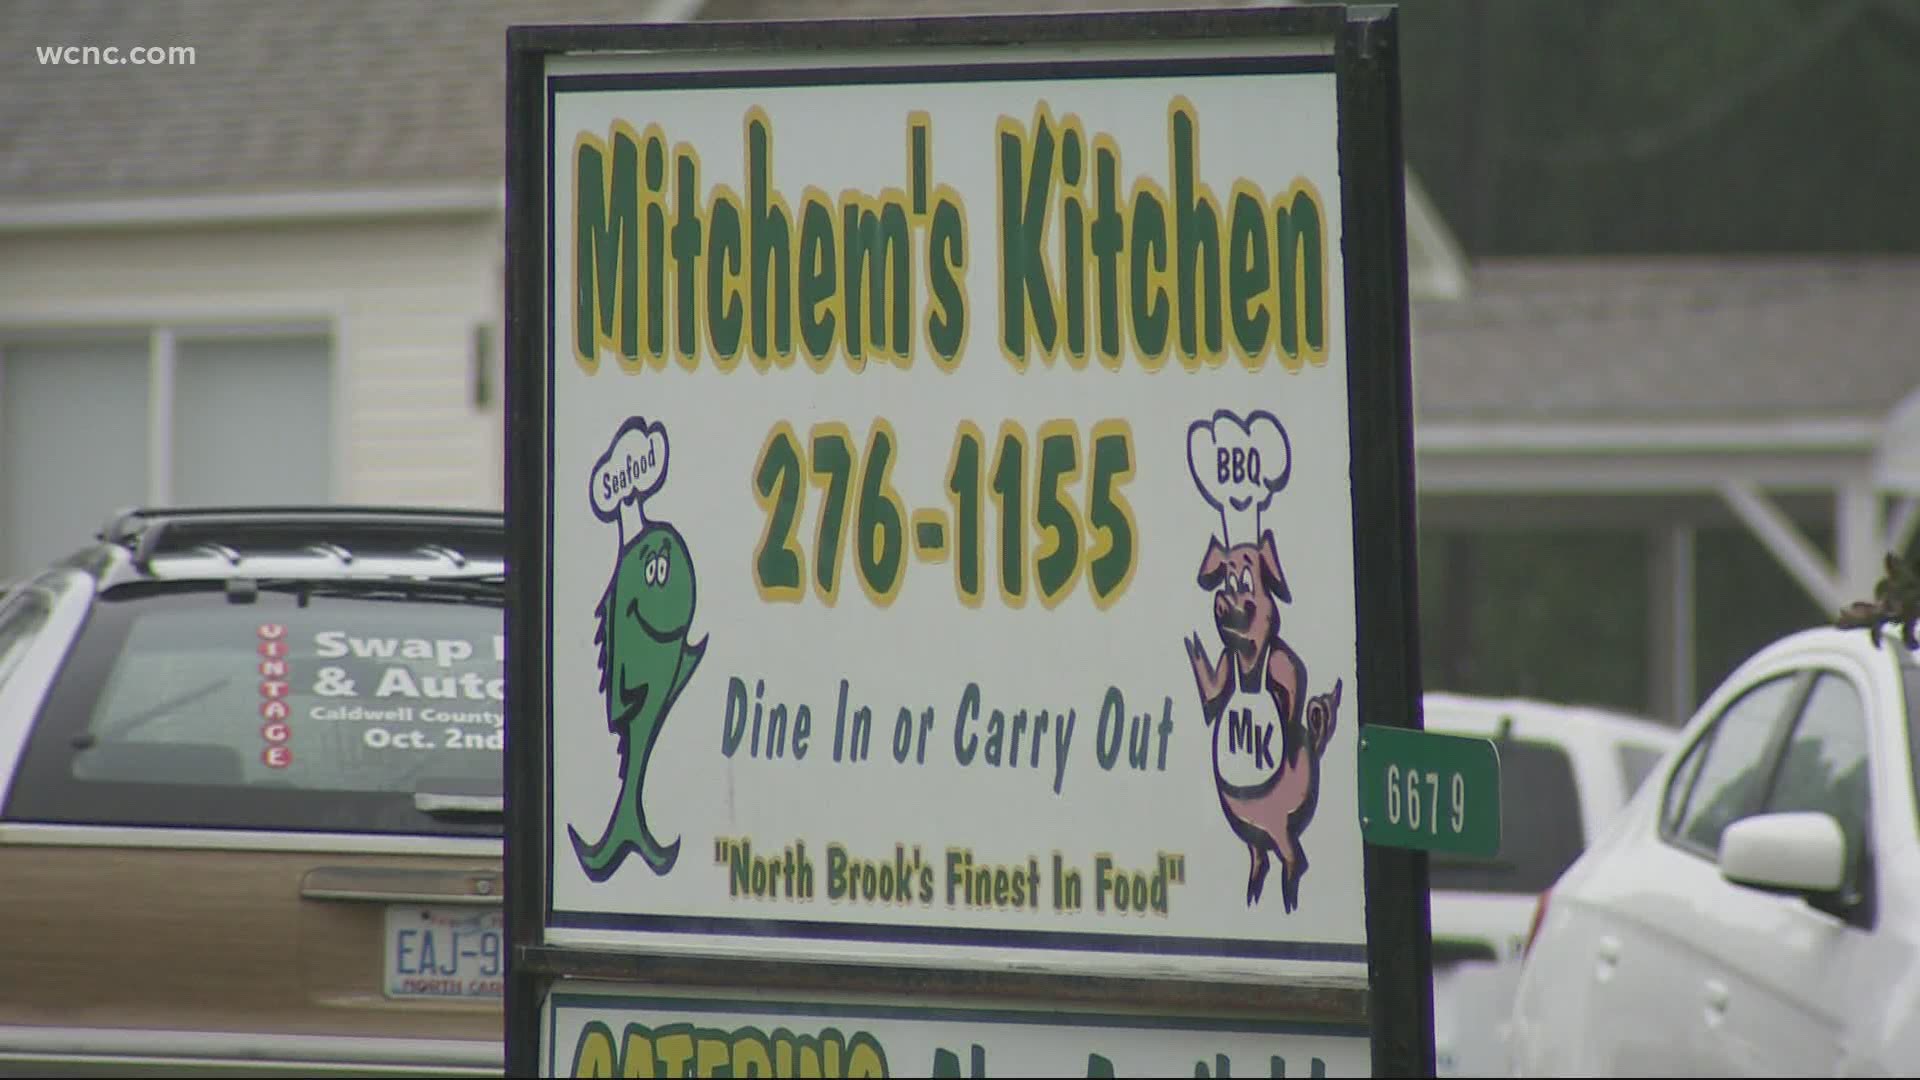 A Lincoln County restaurant owner who was already cited for opening up his dining room reopened for business again. Now, the sheriff is the one under fire.